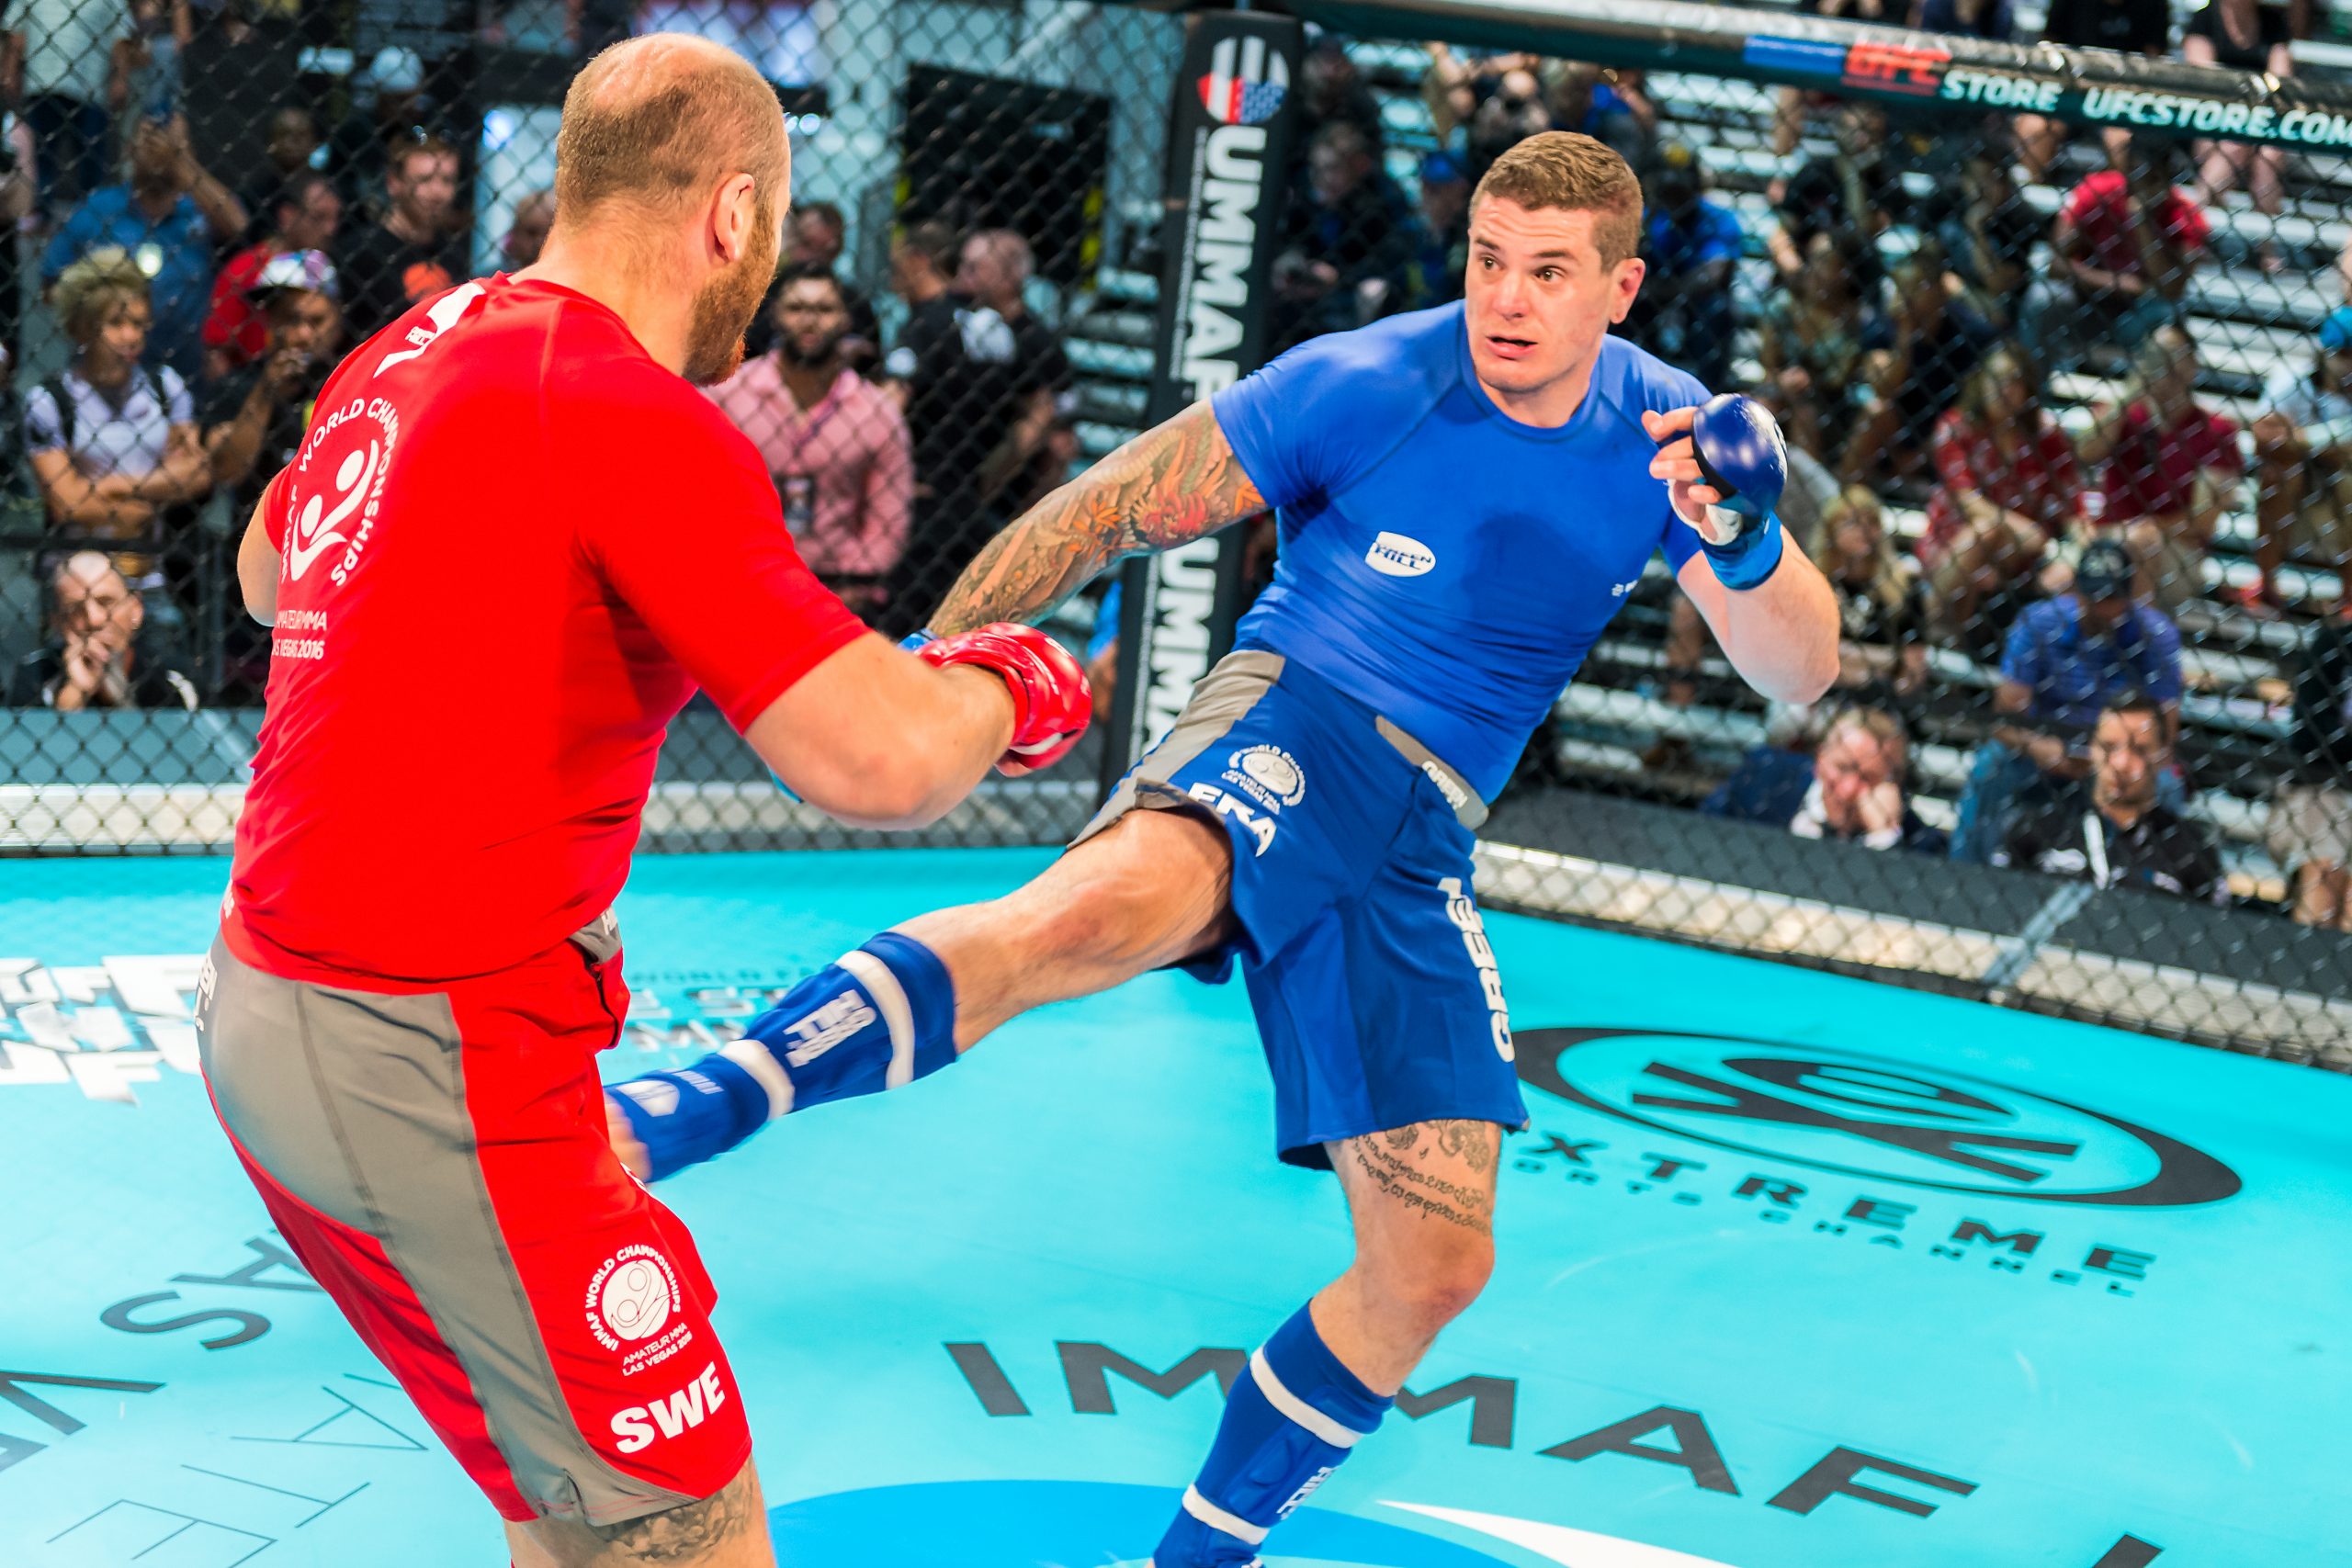 France's CFMMA fighters maintain momentum despite national ban